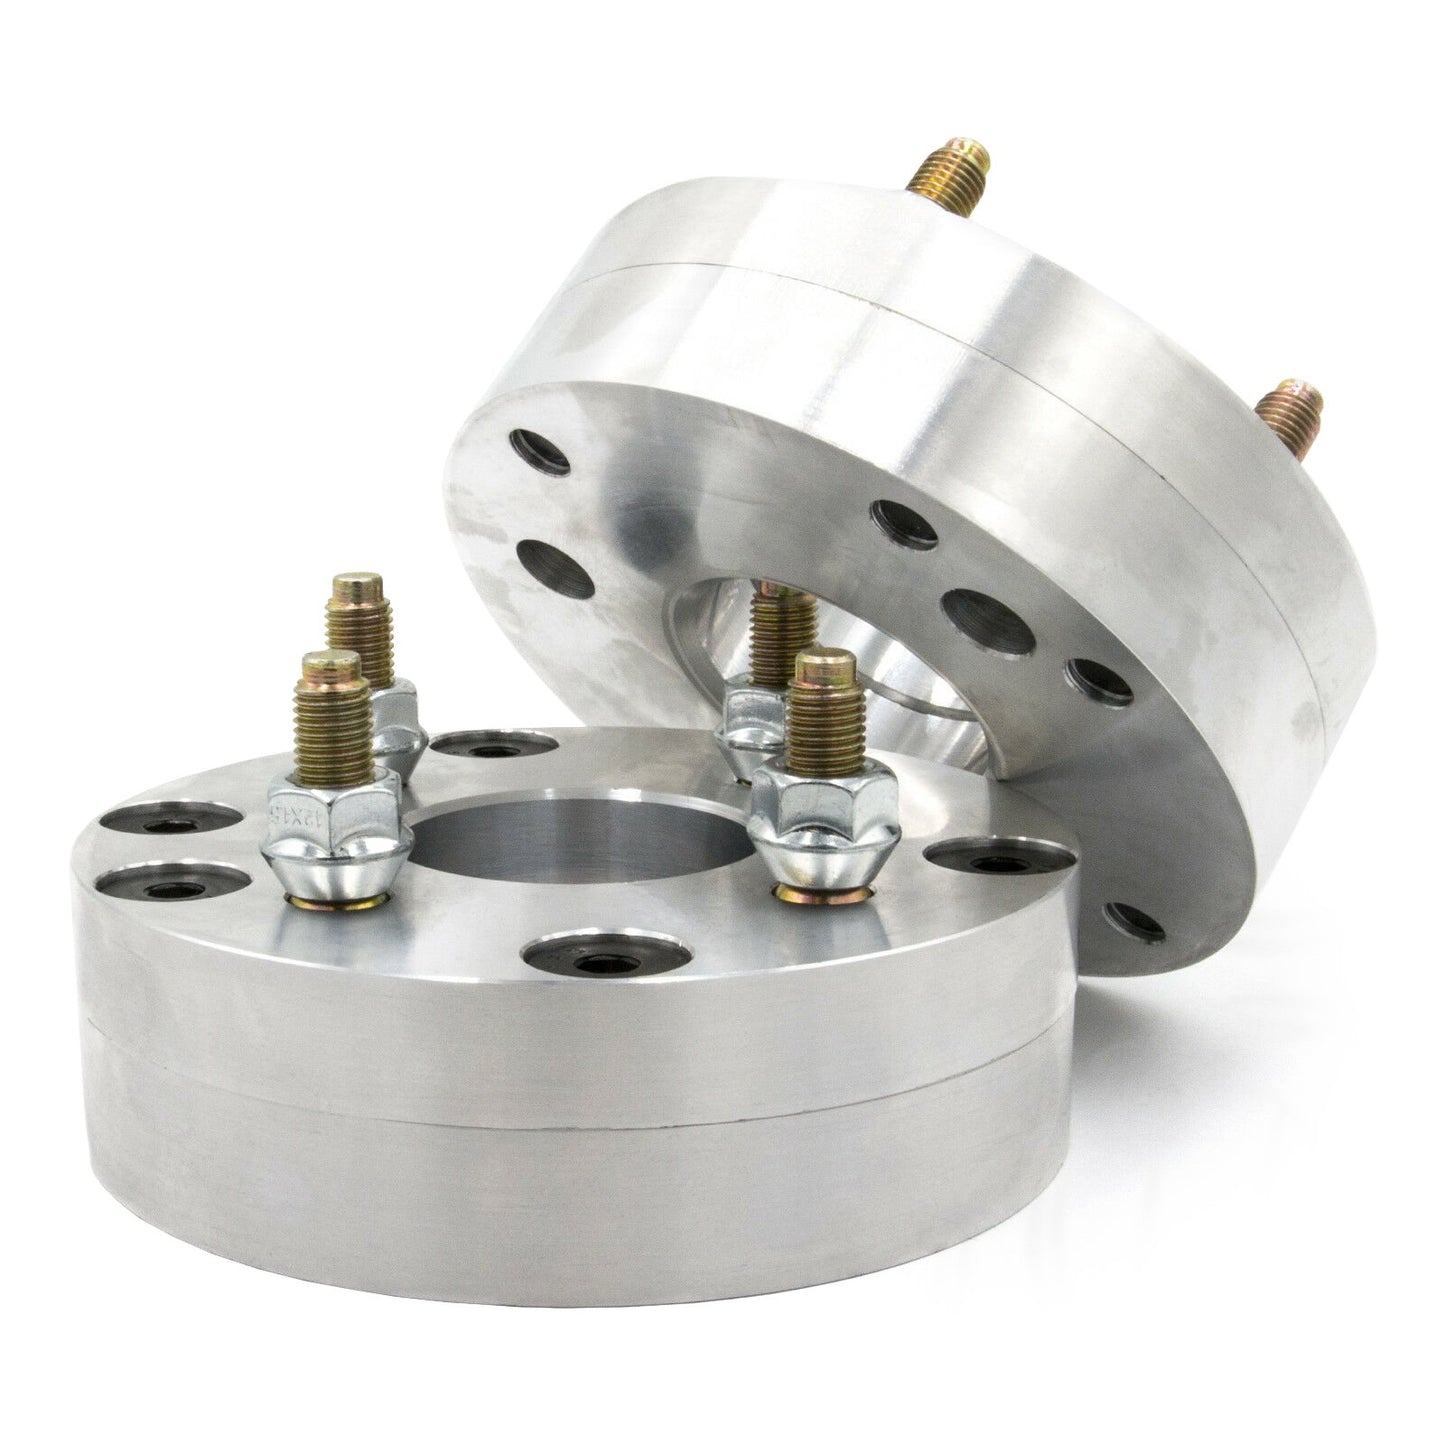 3x112 to 4x4.5" 2 piece Wheel Adapter - Thickness: 1.5" - 3"